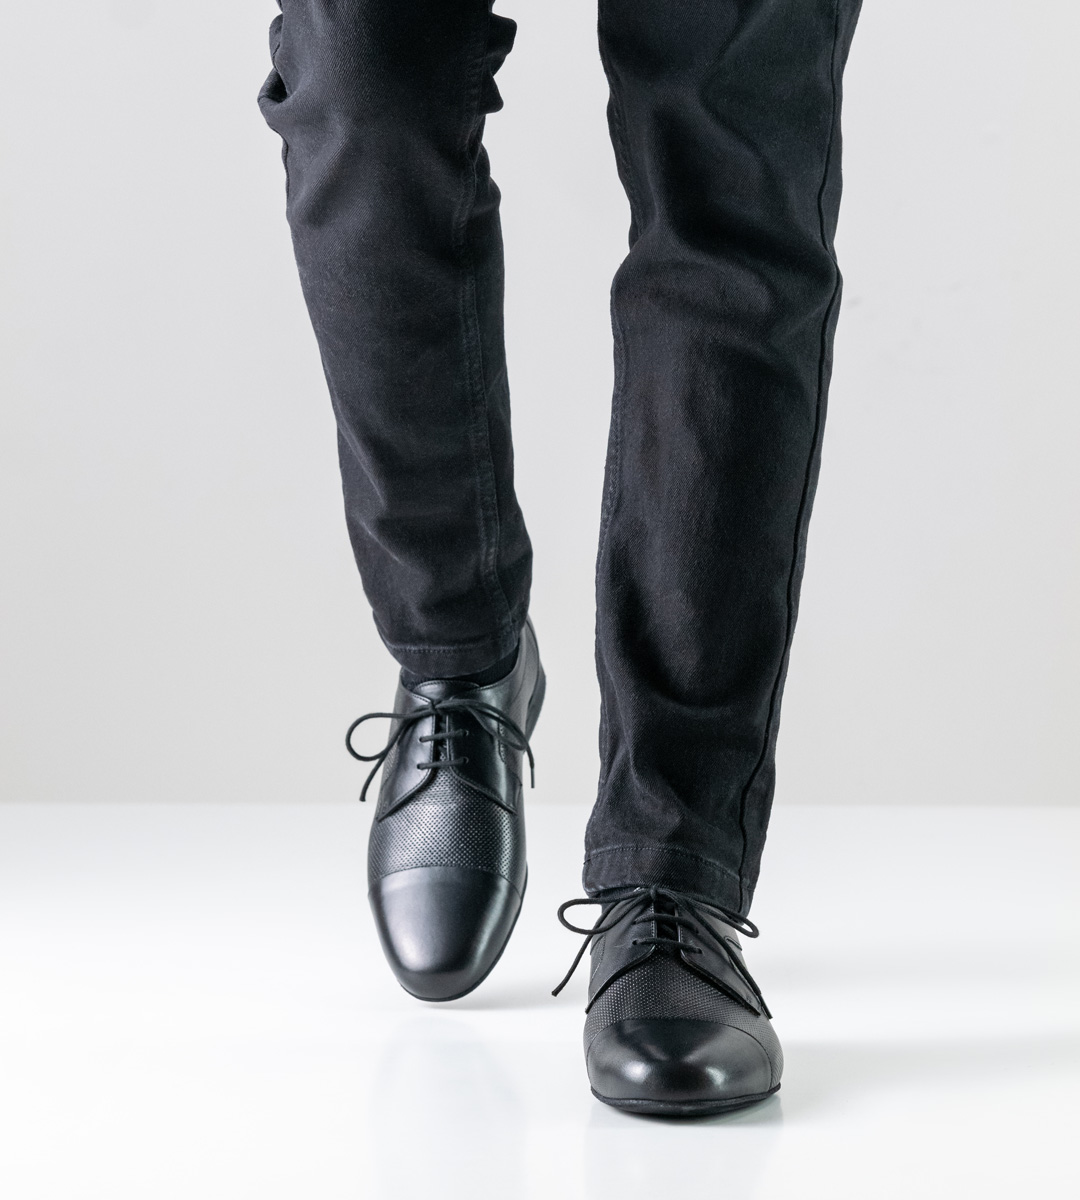 Men's dance shoe by Werner Kern in nappa in combination with black trousers